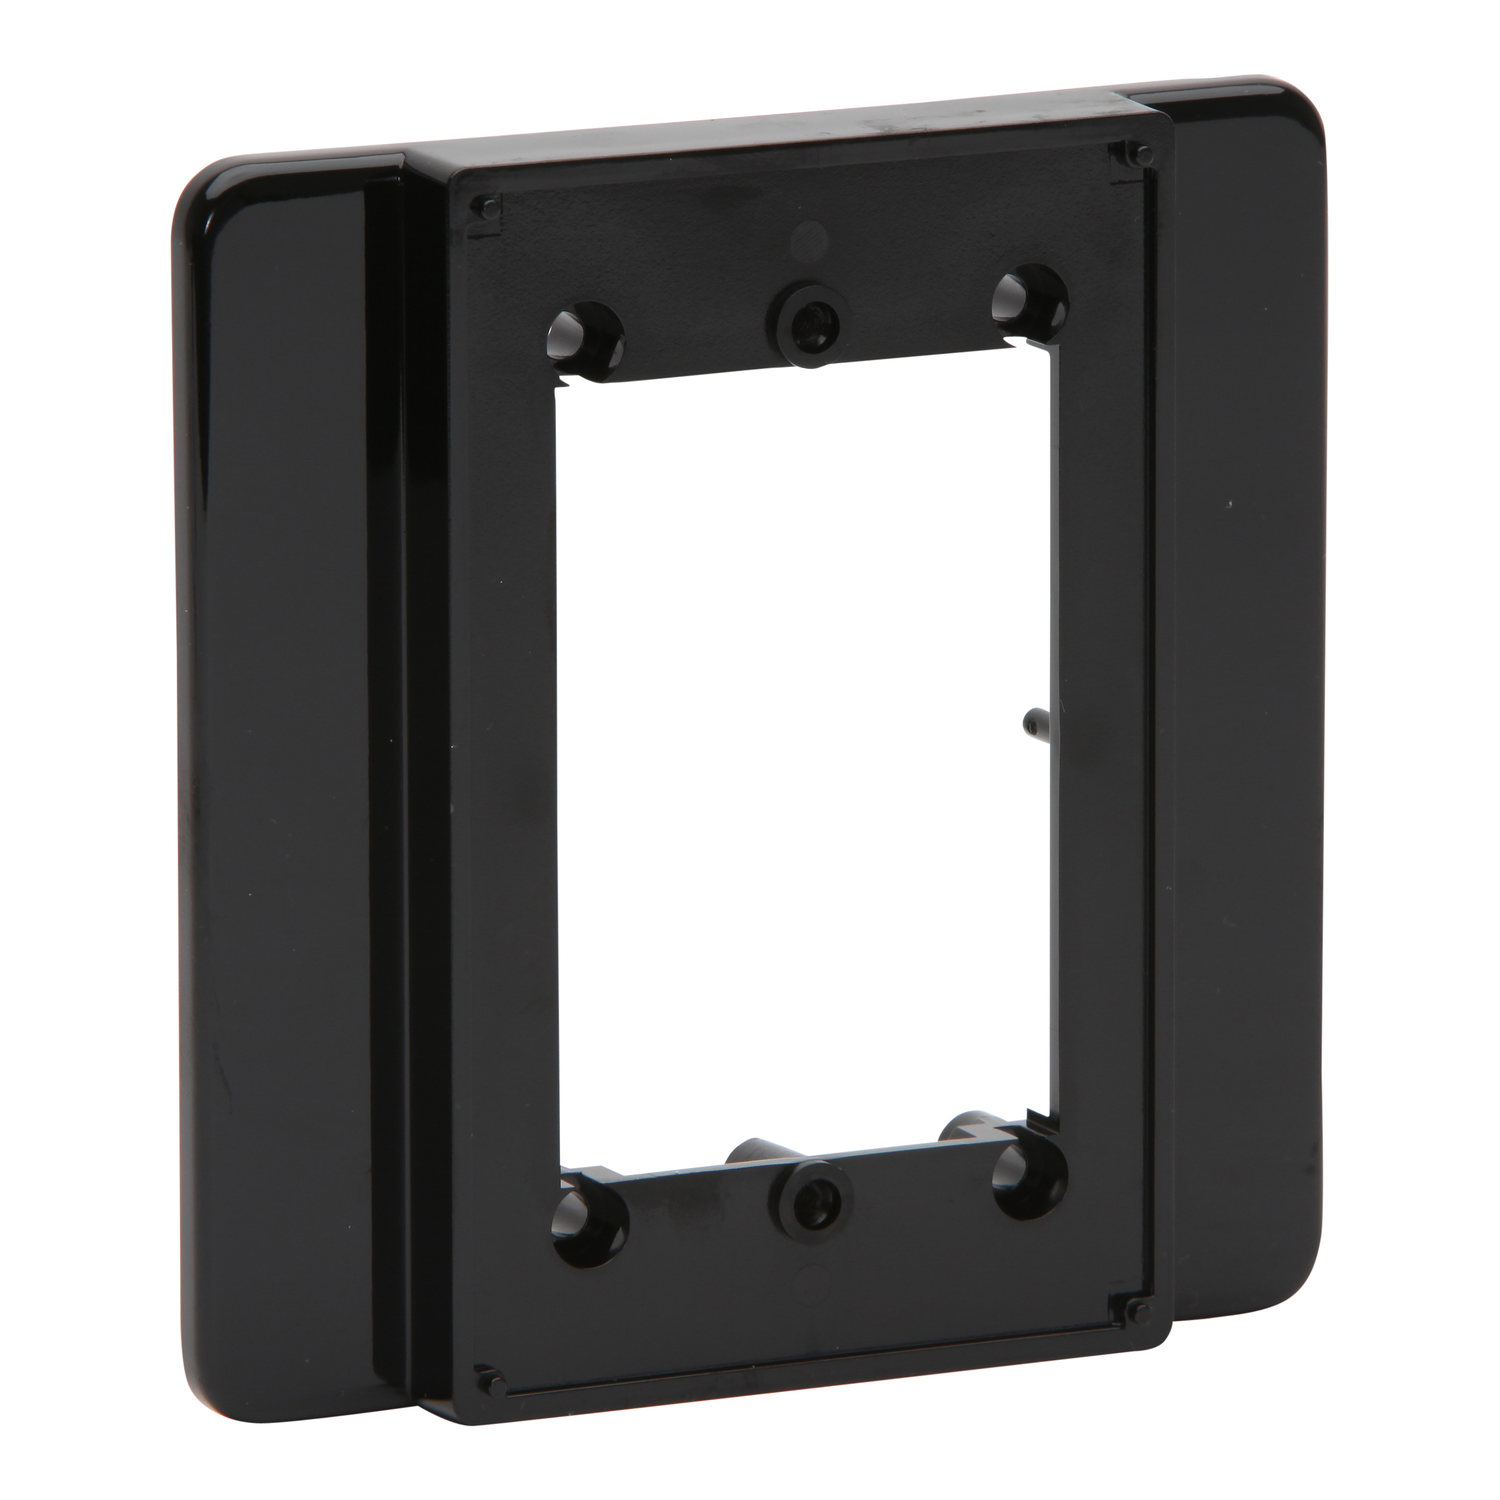 Mounting plate - PDL General Accessories - 2gang